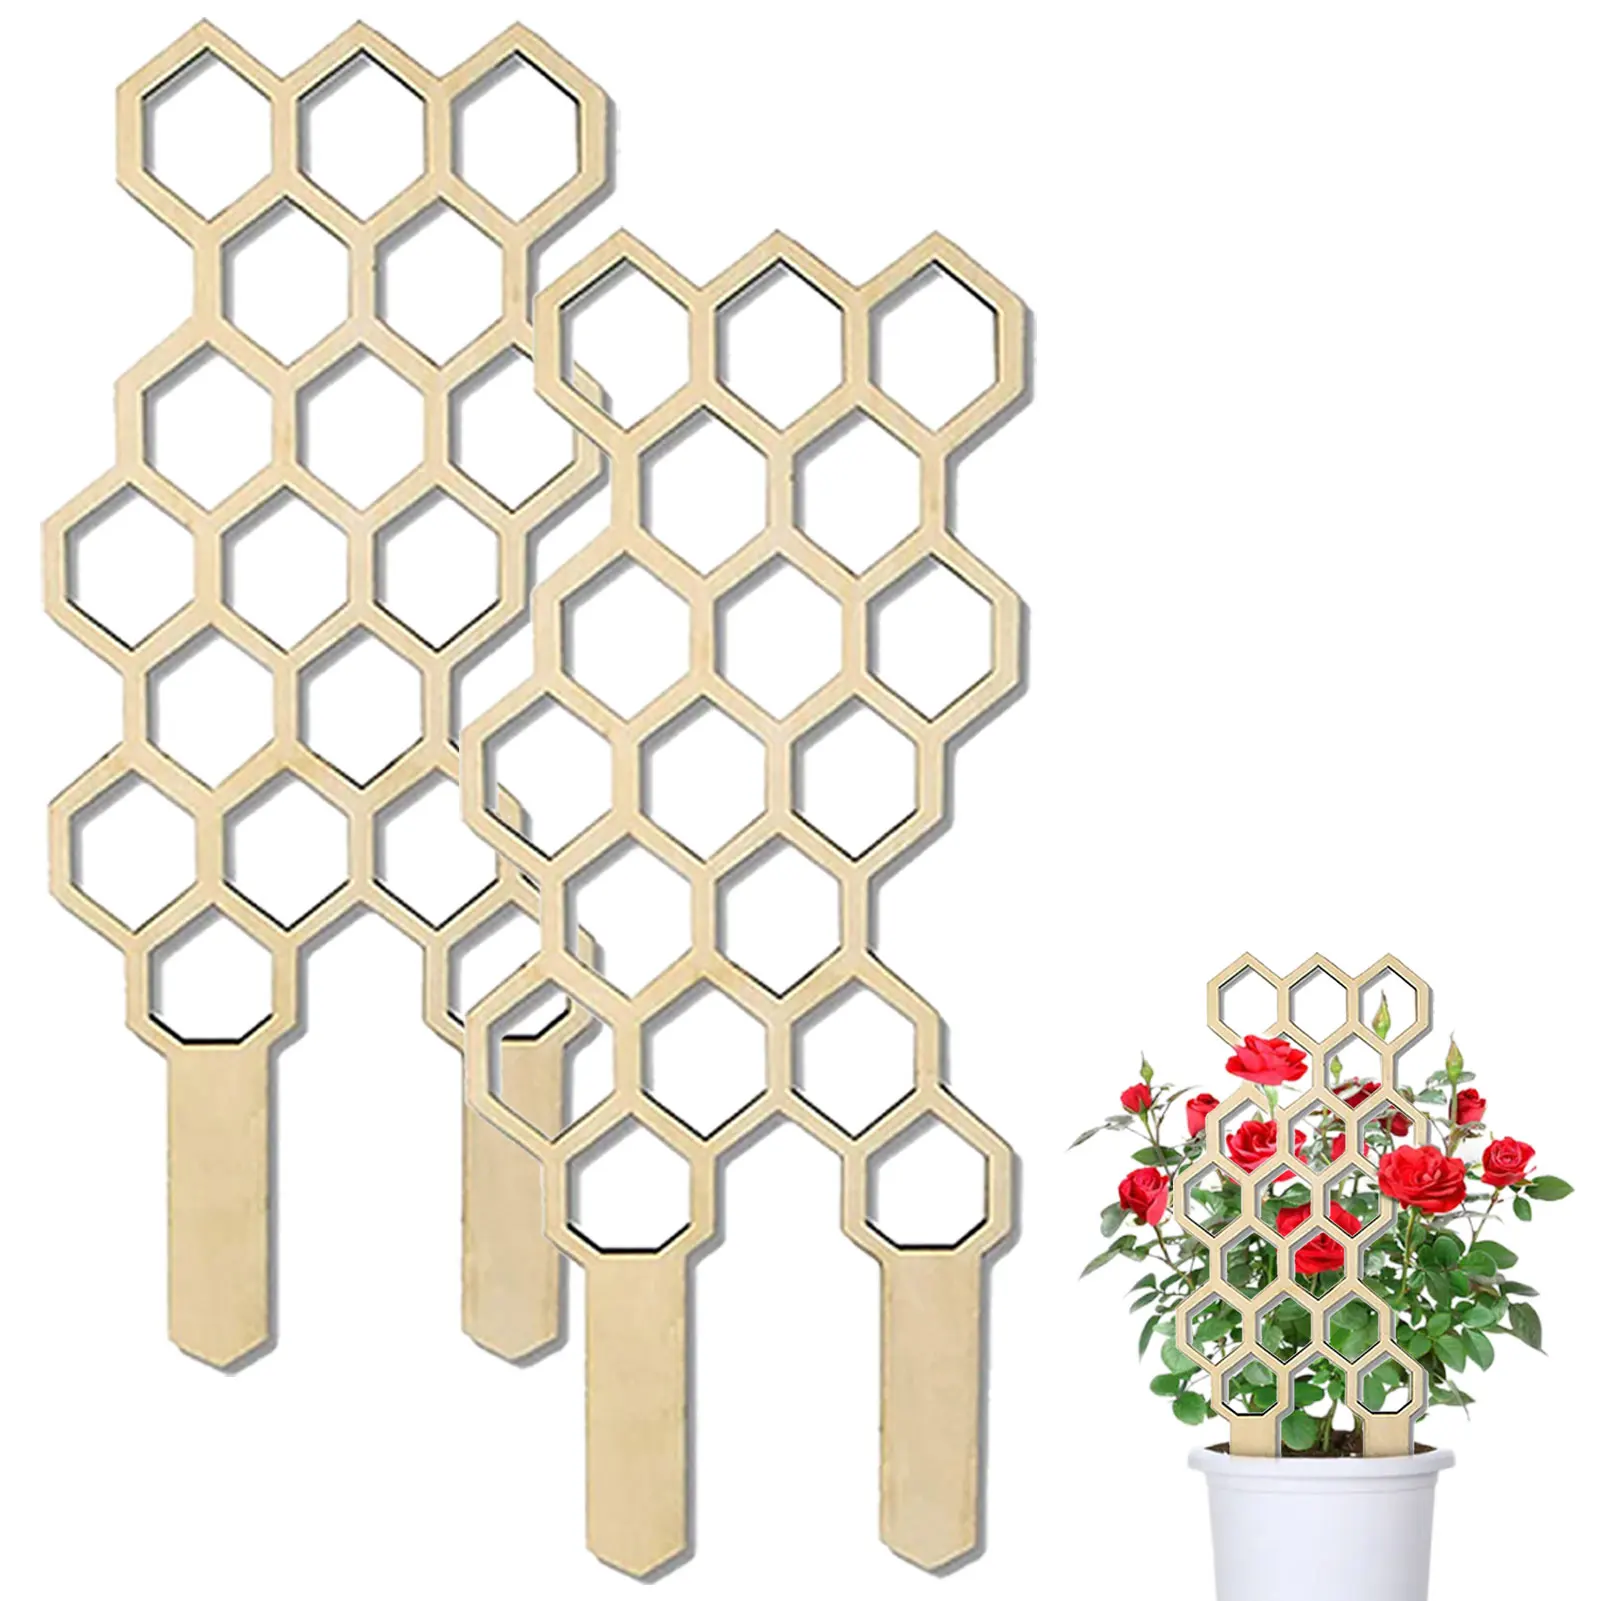 

Trellis For Climbing Plants Indoor Wooden Climbing Plant Support 3pcs/set Plant Stake For Flower Vegetable Tomato Vines Potted